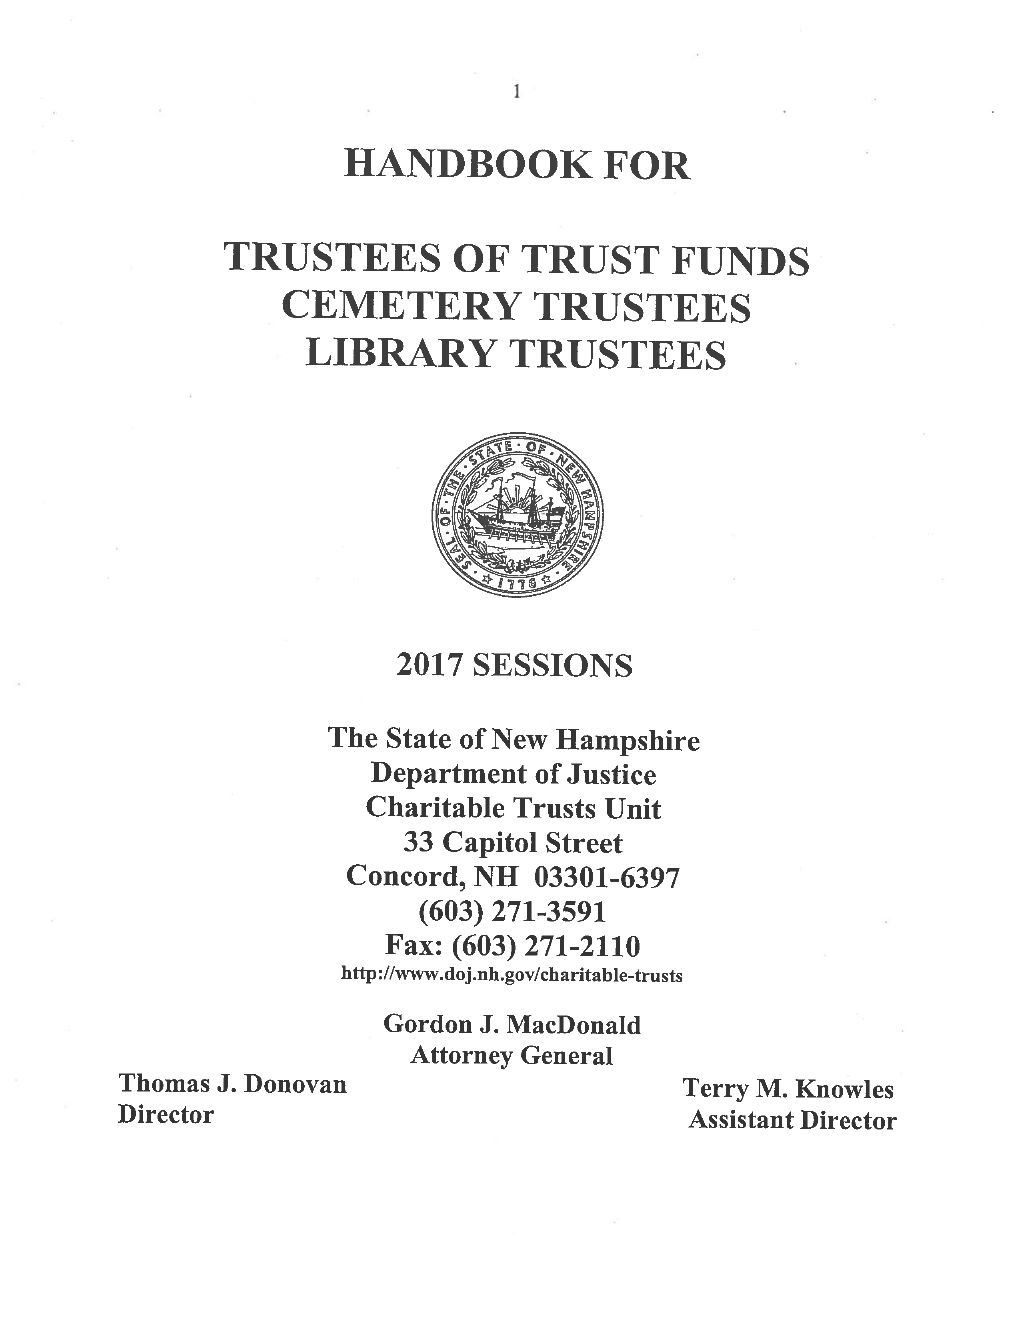 Handbook for Trustees of the Trust Funds, Cemetery Trustees, Library